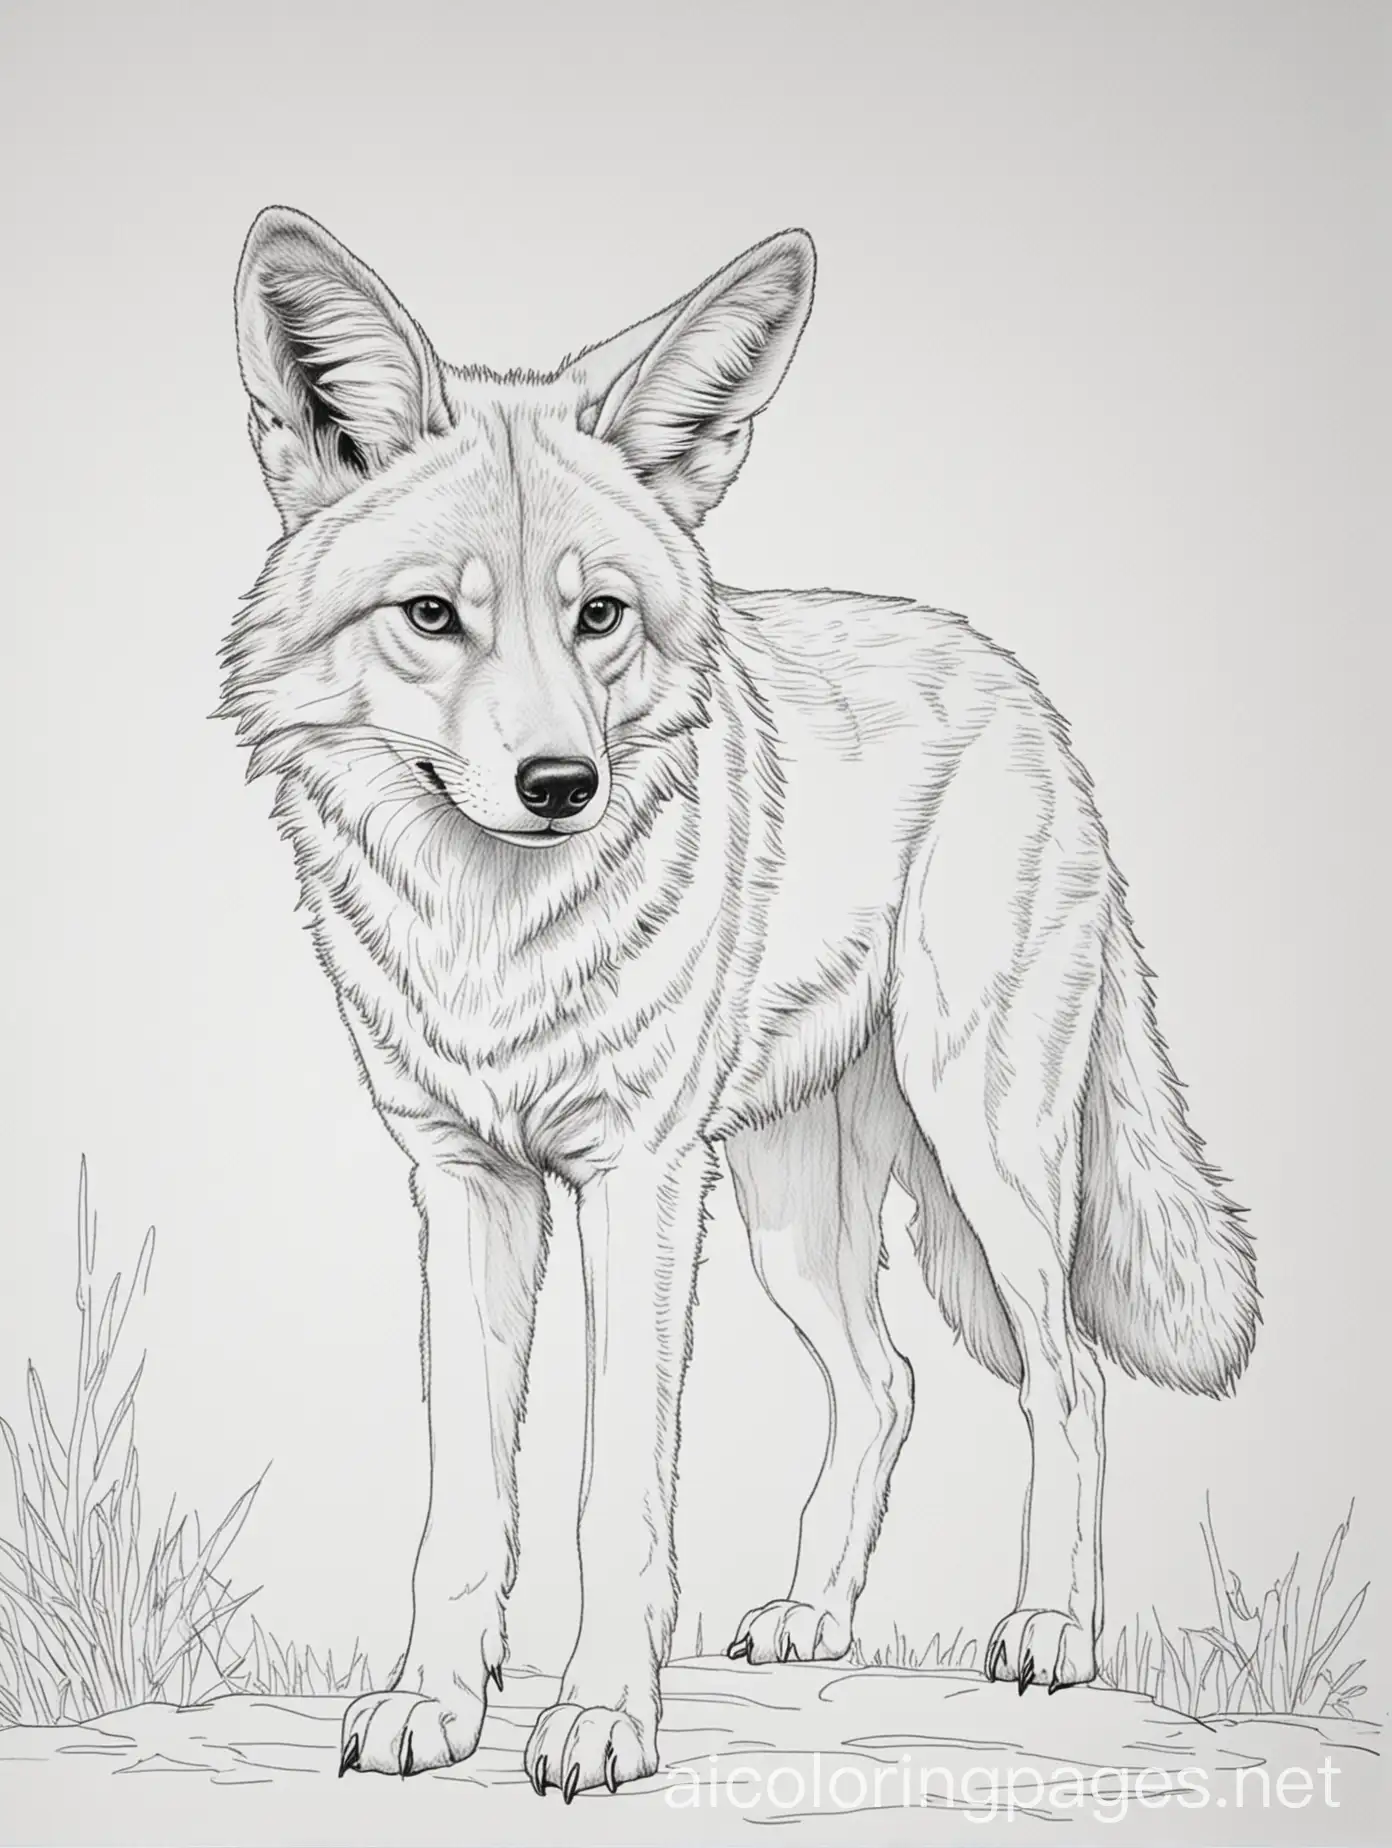 coyote, Coloring Page, black and white, line art, white background, Simplicity, Ample White Space. The background of the coloring page is plain white to make it easy for young children to color within the lines. The outlines of all the subjects are easy to distinguish, making it simple for kids to color without too much difficulty, Coloring Page, black and white, line art, white background, Simplicity, Ample White Space. The background of the coloring page is plain white to make it easy for young children to color within the lines. The outlines of all the subjects are easy to distinguish, making it simple for kids to color without too much difficulty